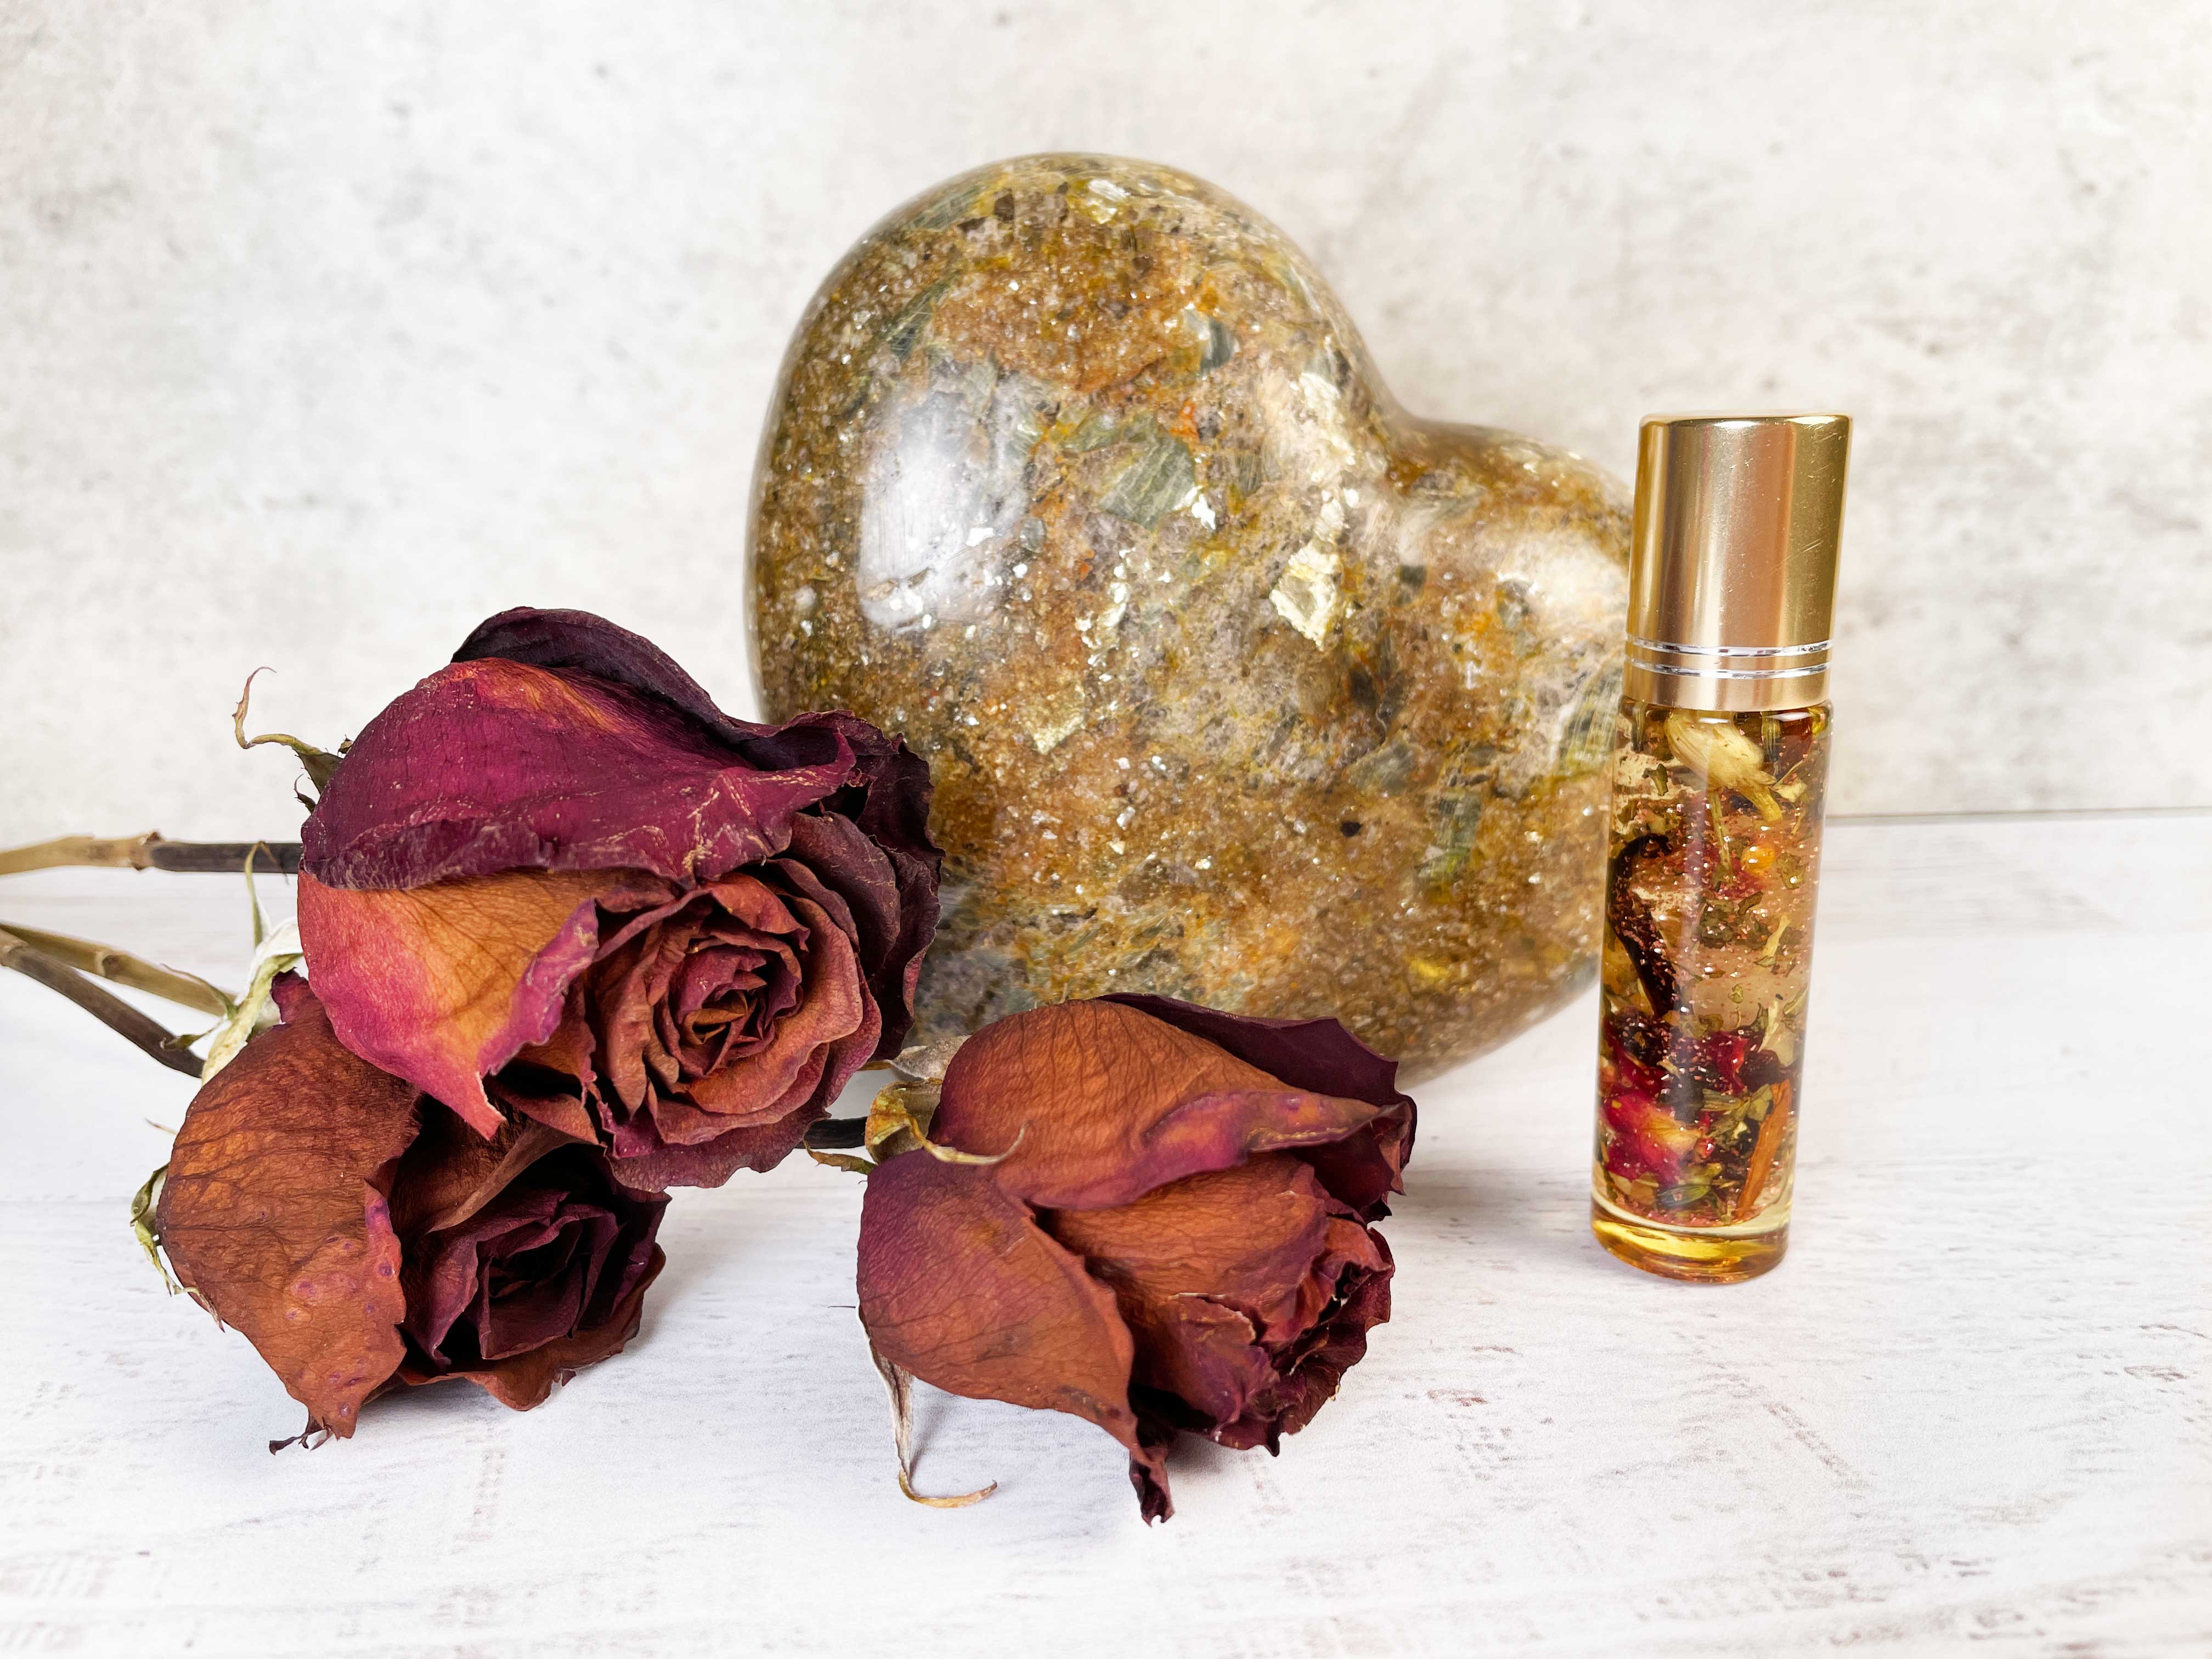 Buy Online Latest and Unique Love, Romance, Self - Love Oil | Shop Best Spiritual Items - The Mystical Ritual